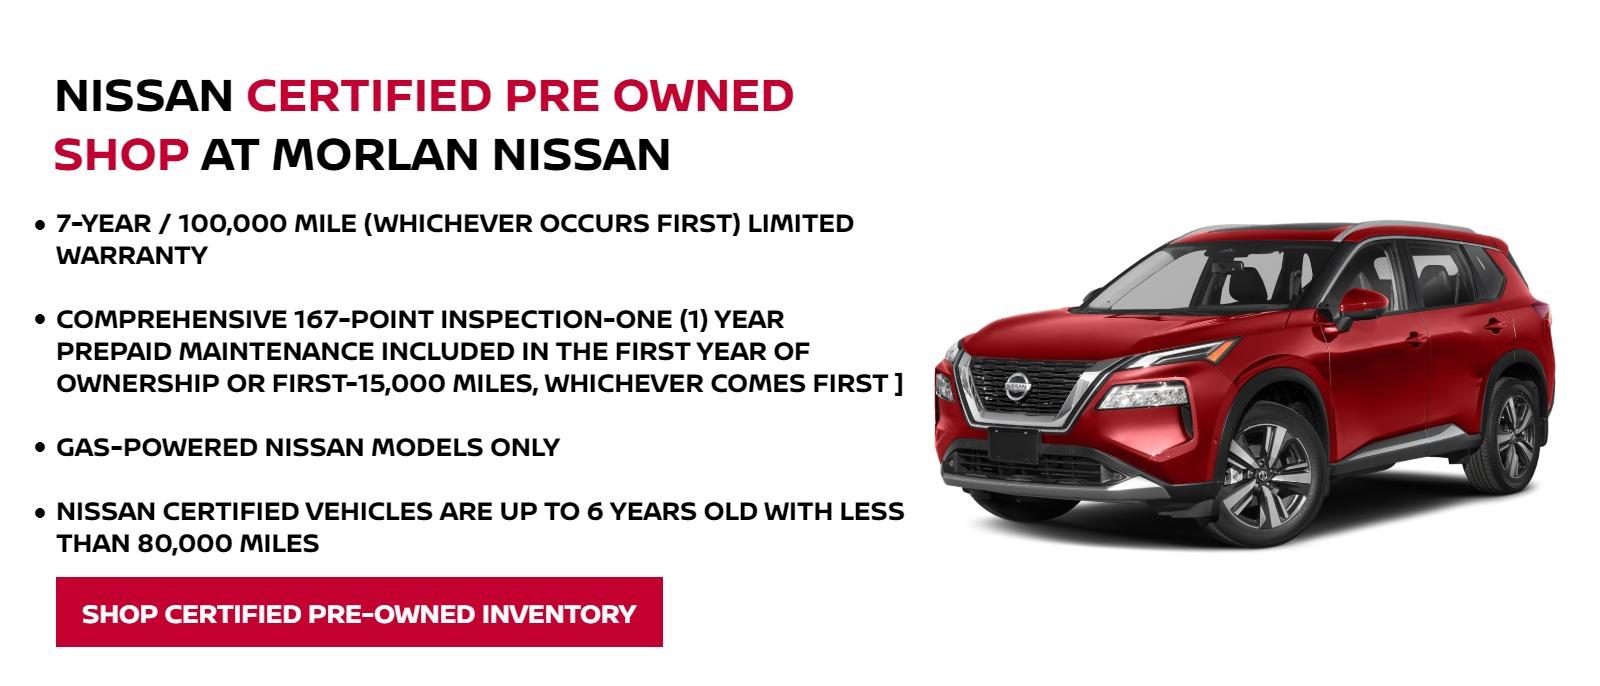 Nissan Certified Pre Owned
Shop at Morlan Nissan


-7-year / 100,000 mile (whichever occurs first) limited warranty
-Comprehensive 167-point inspection
-One (1) year prepaid maintenance included in the first year of ownership or first -15,000 miles, whichever comes first ]
-Gas-powered Nissan models only
-Nissan Certified vehicles are up to 6 years old with less than 80,000 miles